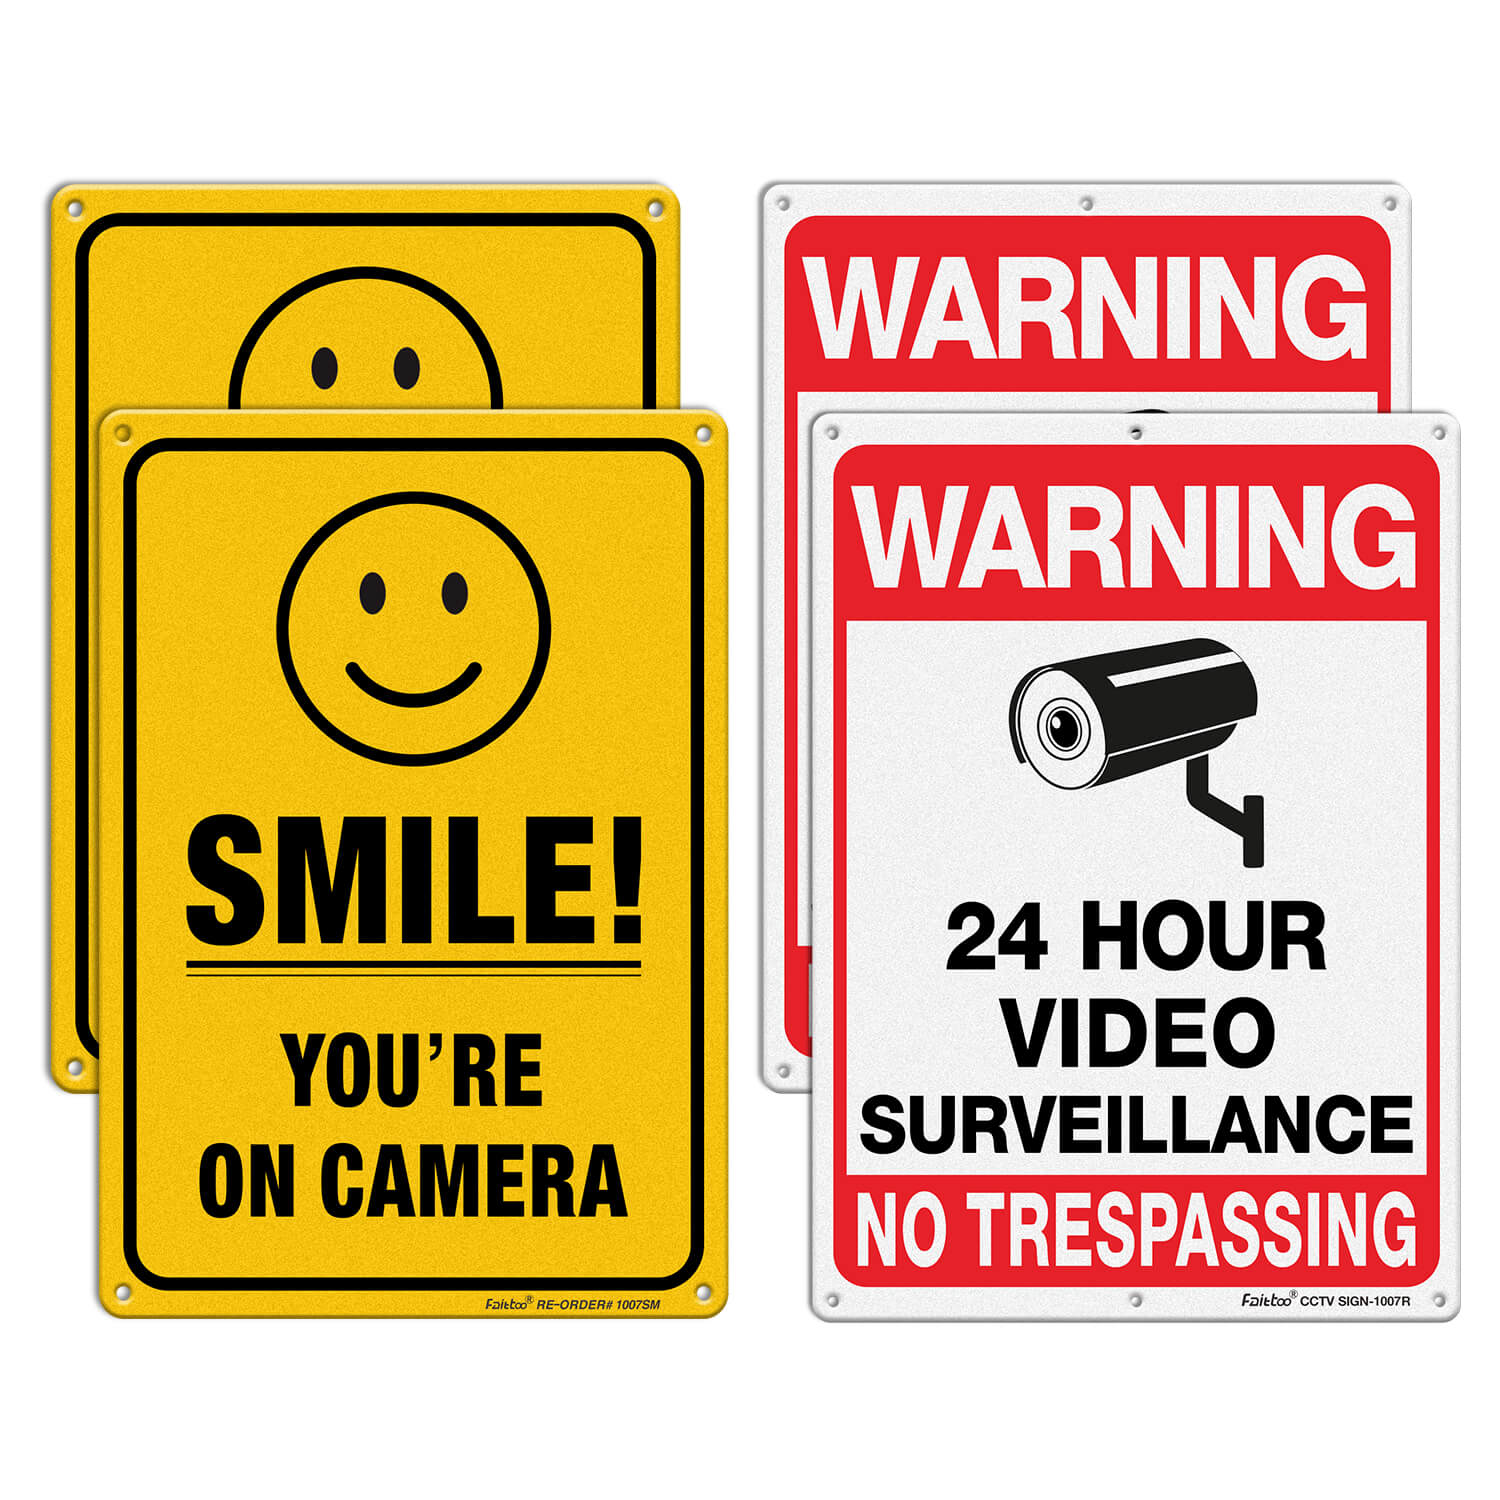 Faittoo Video Surveillance No Trespassing Smile You're On Camera Sign, (4 Pack) 10 x 7 In Rust Free .040 Aluminum Warning Sign for Home, Business, CCTV, Reflective, UV Protected, Fade Resistant